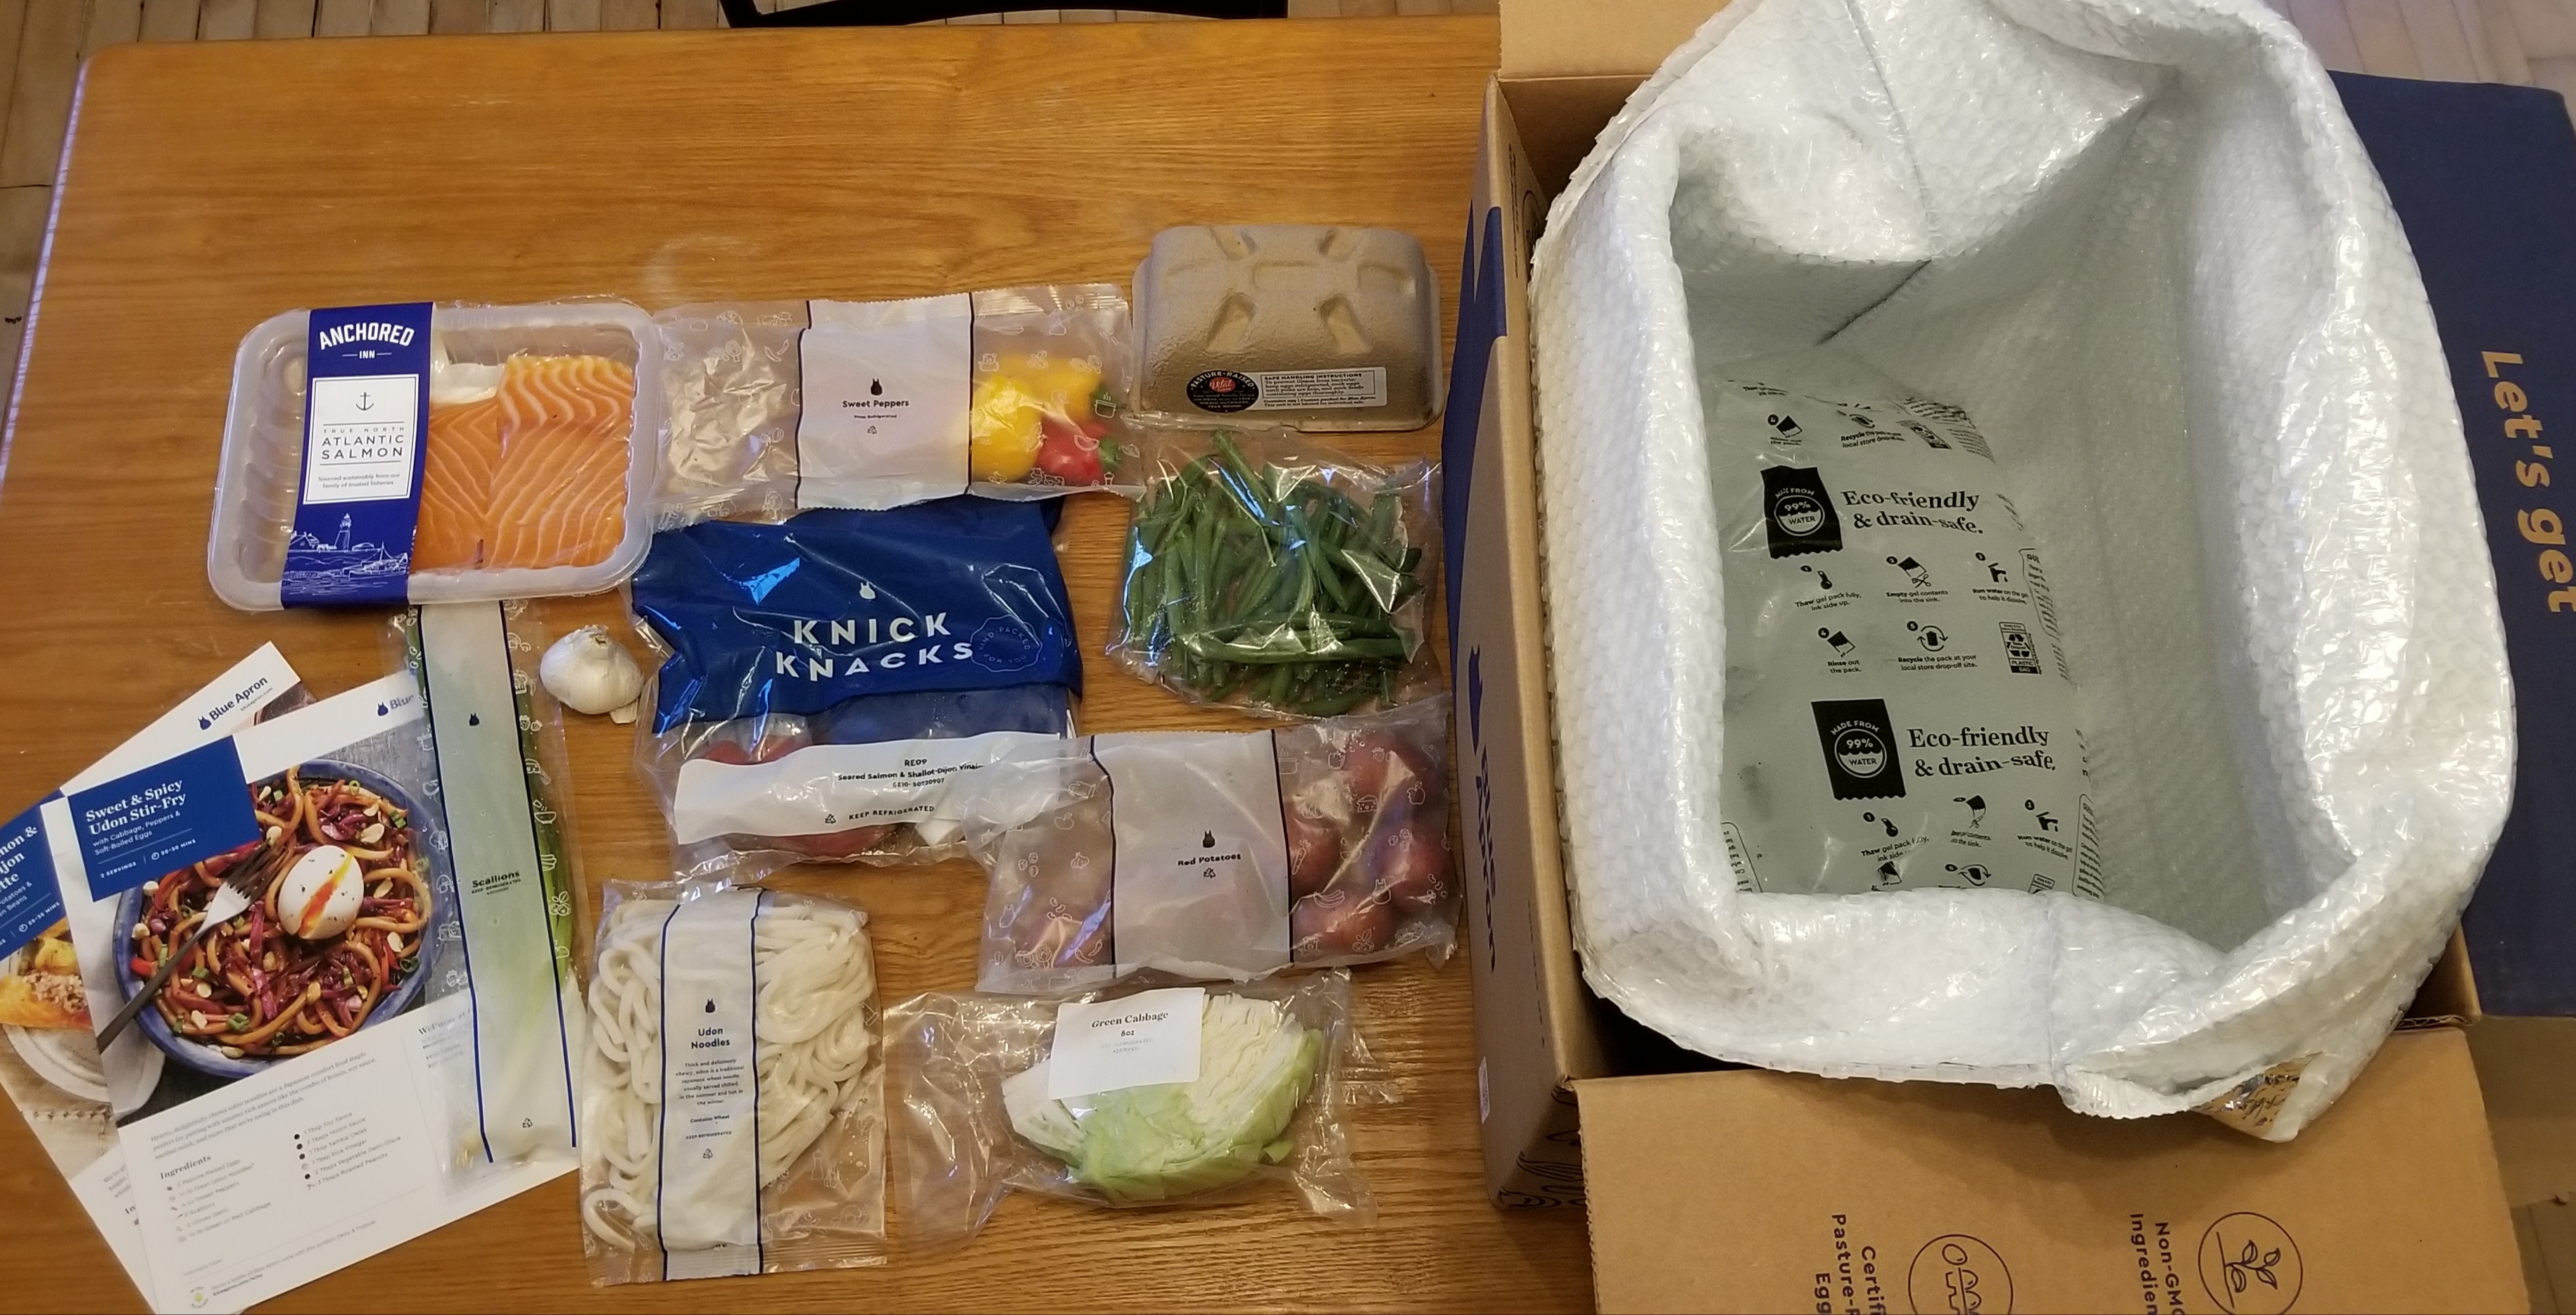 How to dispose of meal delivery kit packaging